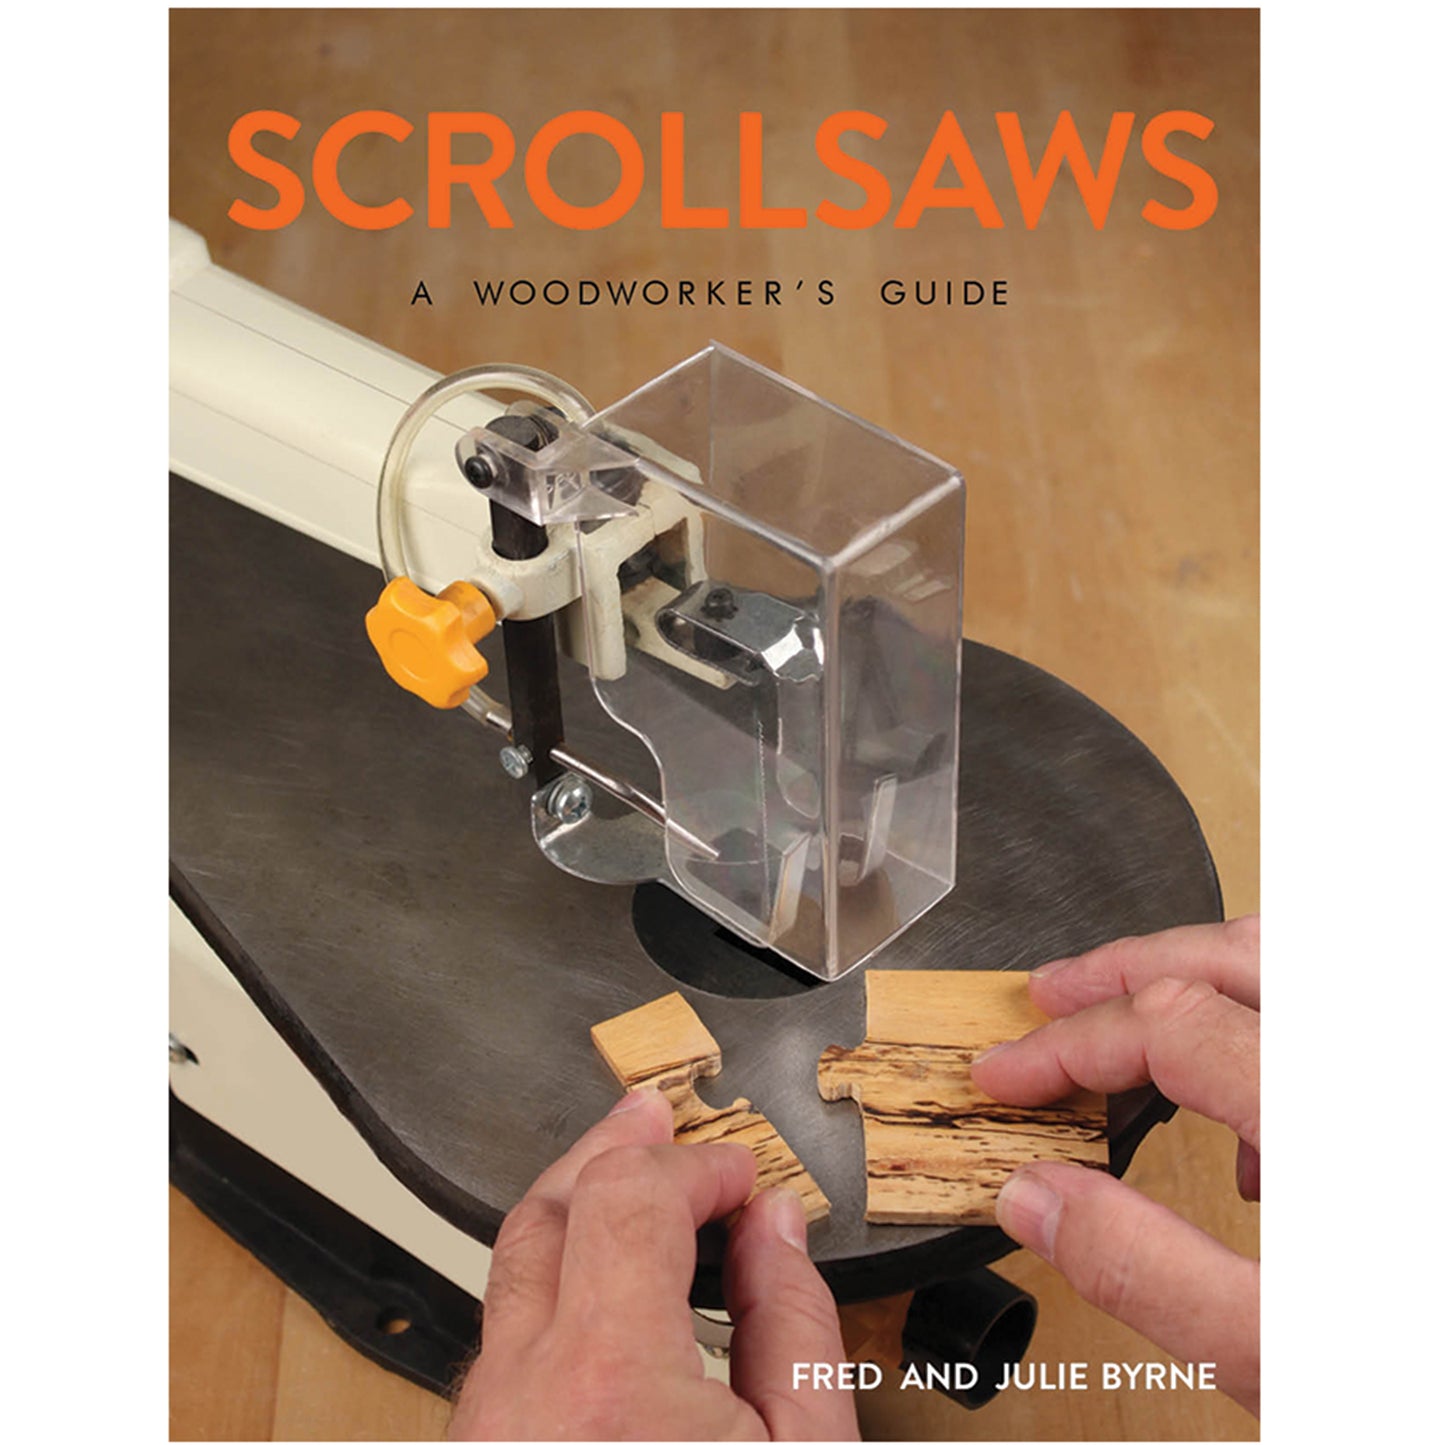 Scrollsaws A Woodworkers Guide alt 0